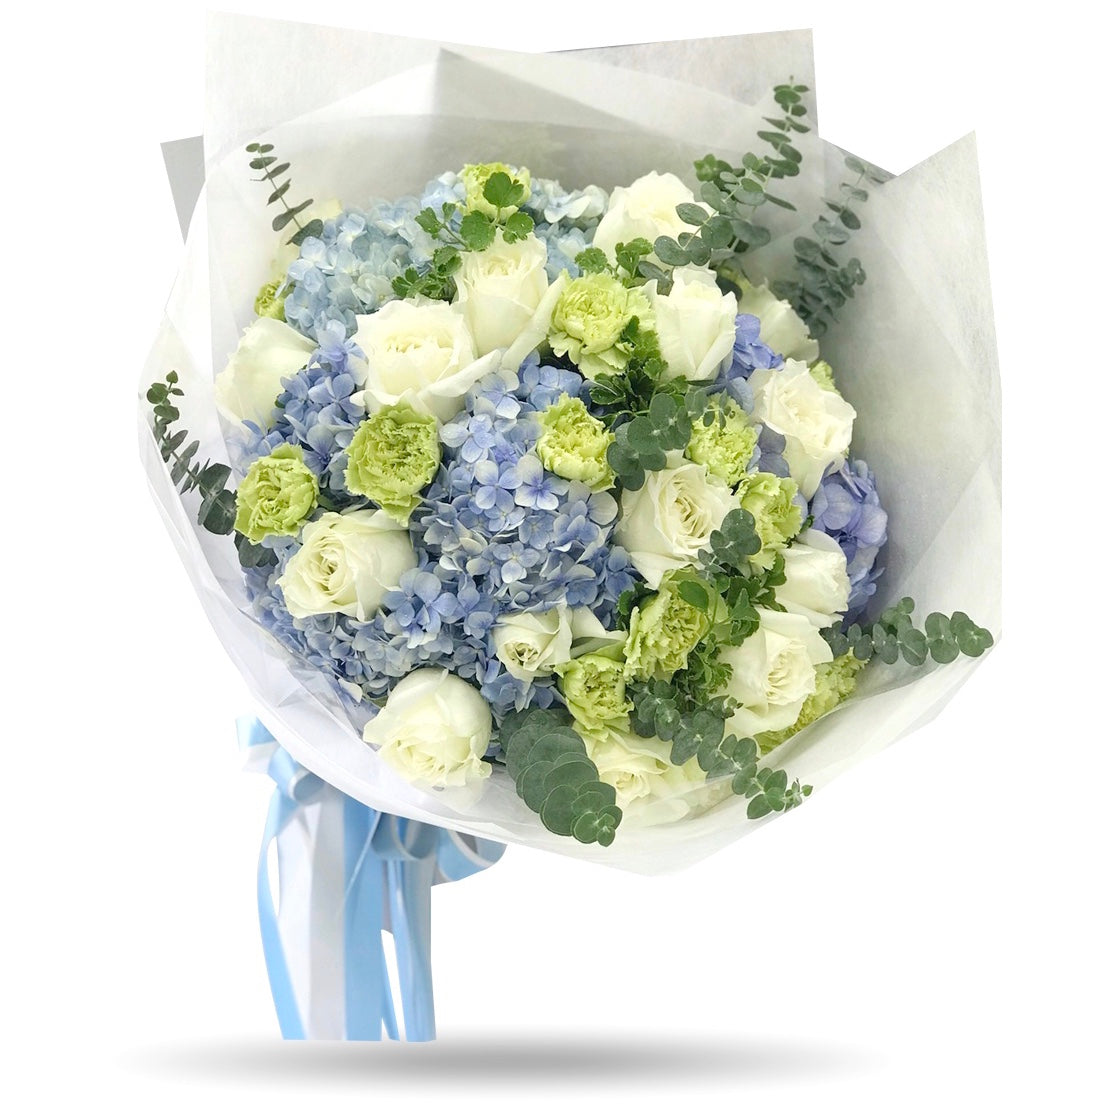 Classic mixed blue hydrangea with white roses - April Flora